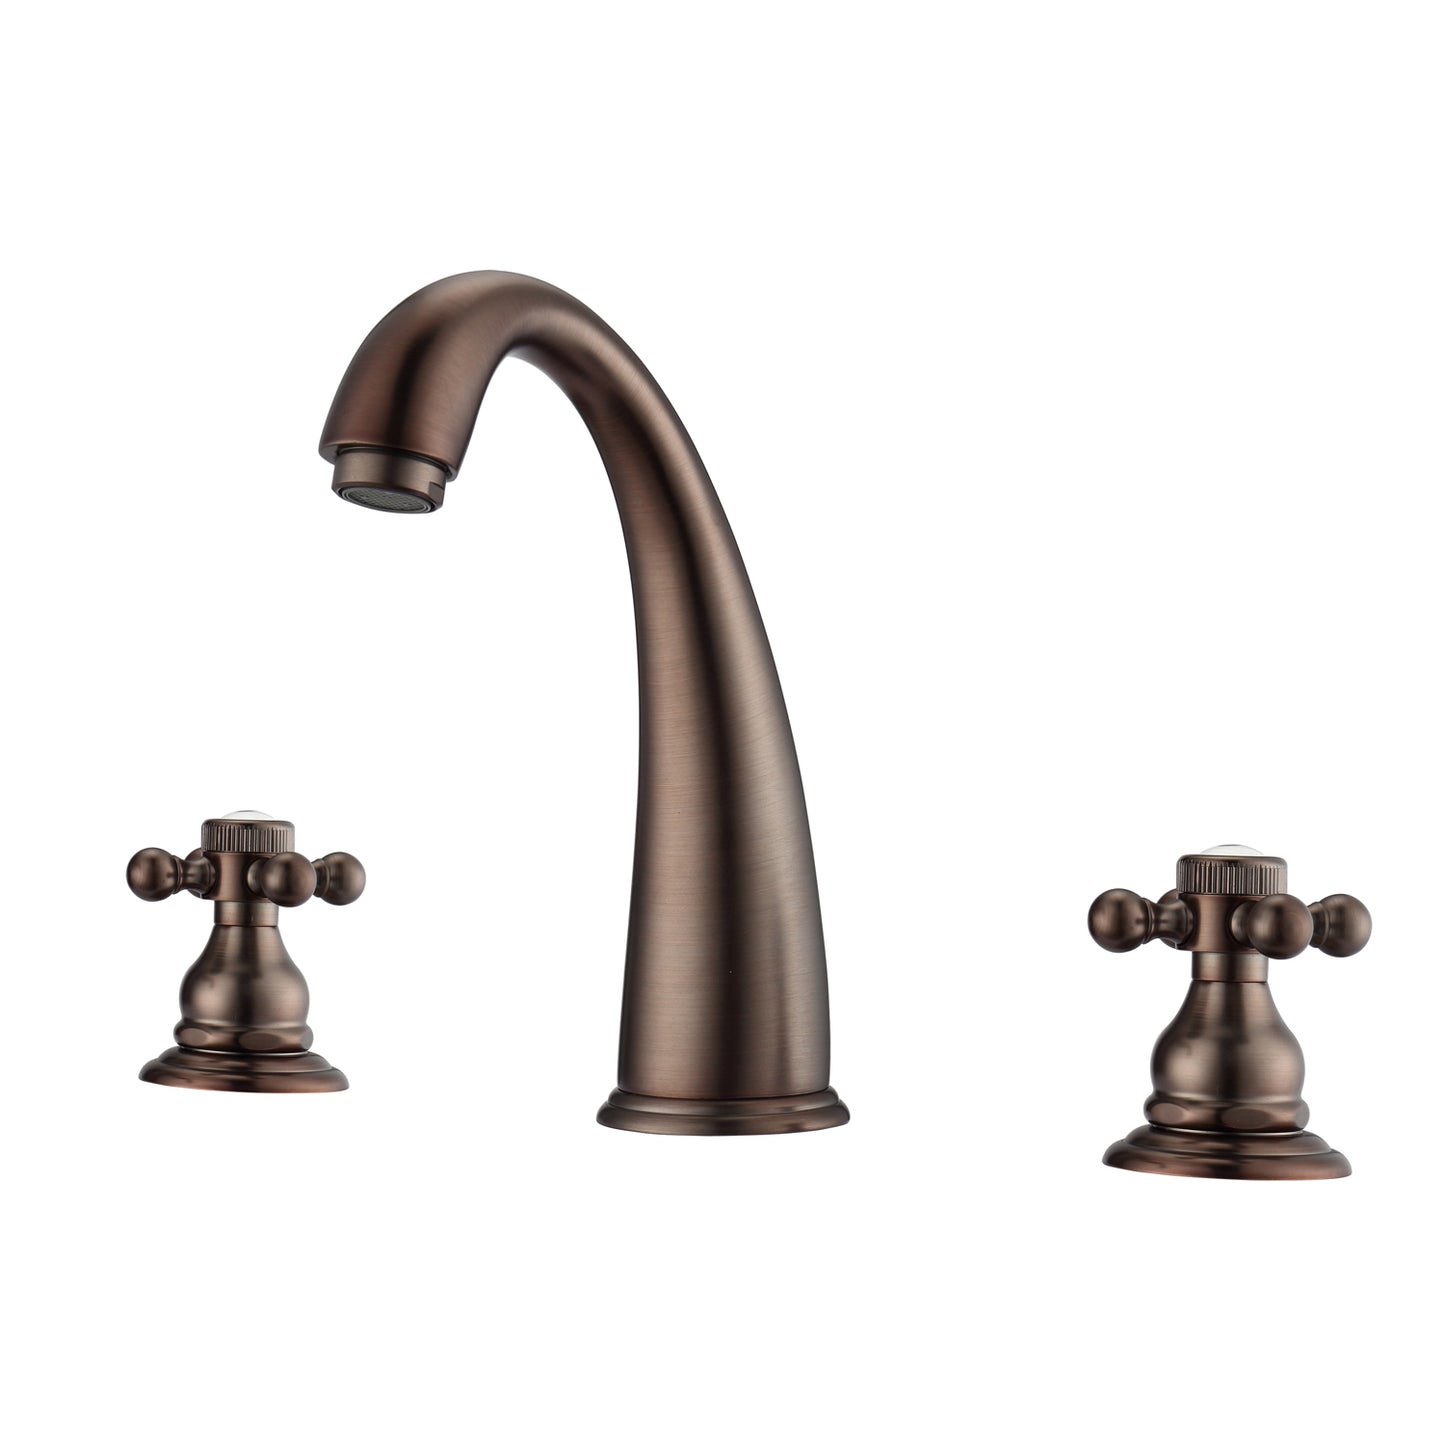 Maddox 8" Widespread Oil Rubbed Bronze Bathroom Faucet with Button Cross Handles